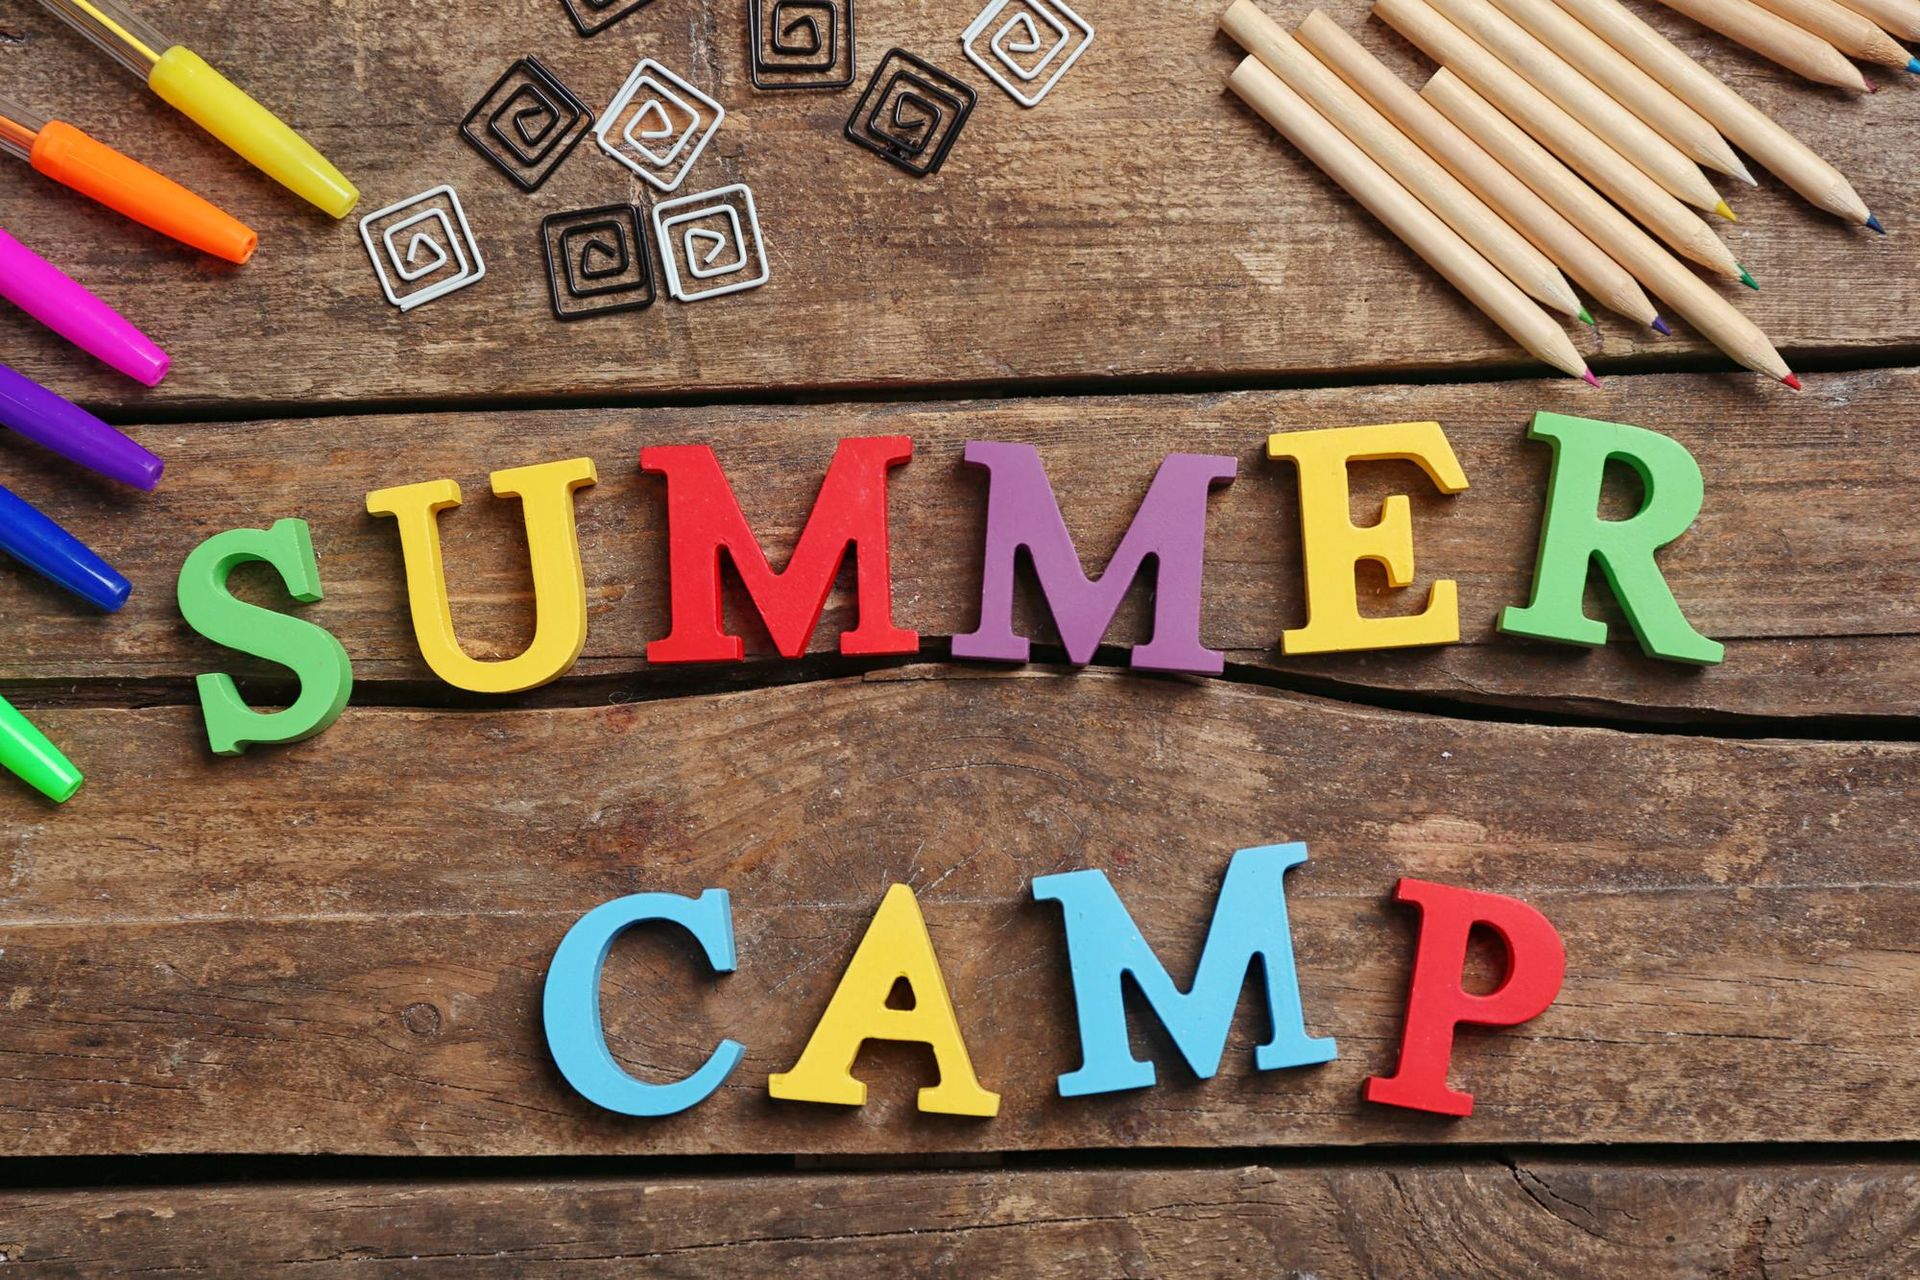 The word summer camp is written in colorful wooden letters on a wooden table.